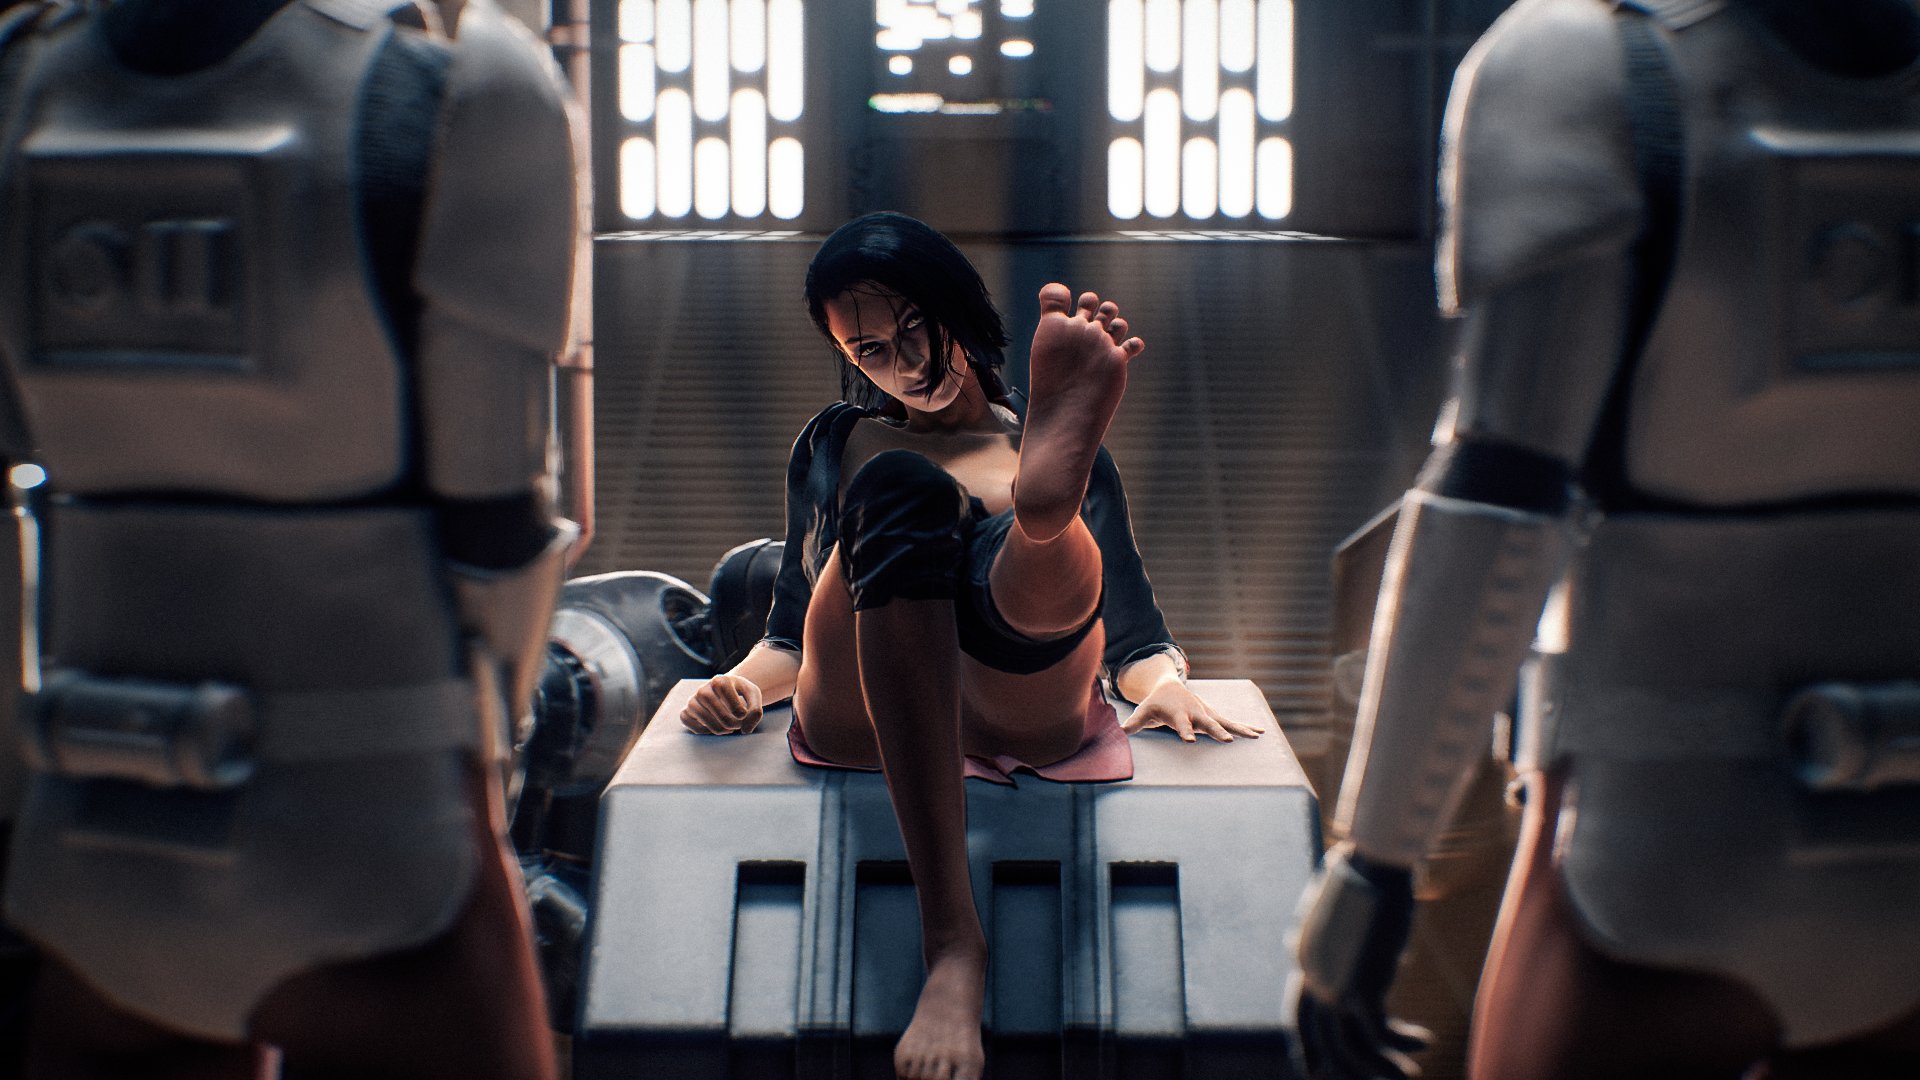 Please check out my SFW DeviantArt!

#NSFW #StarWars #Trill...